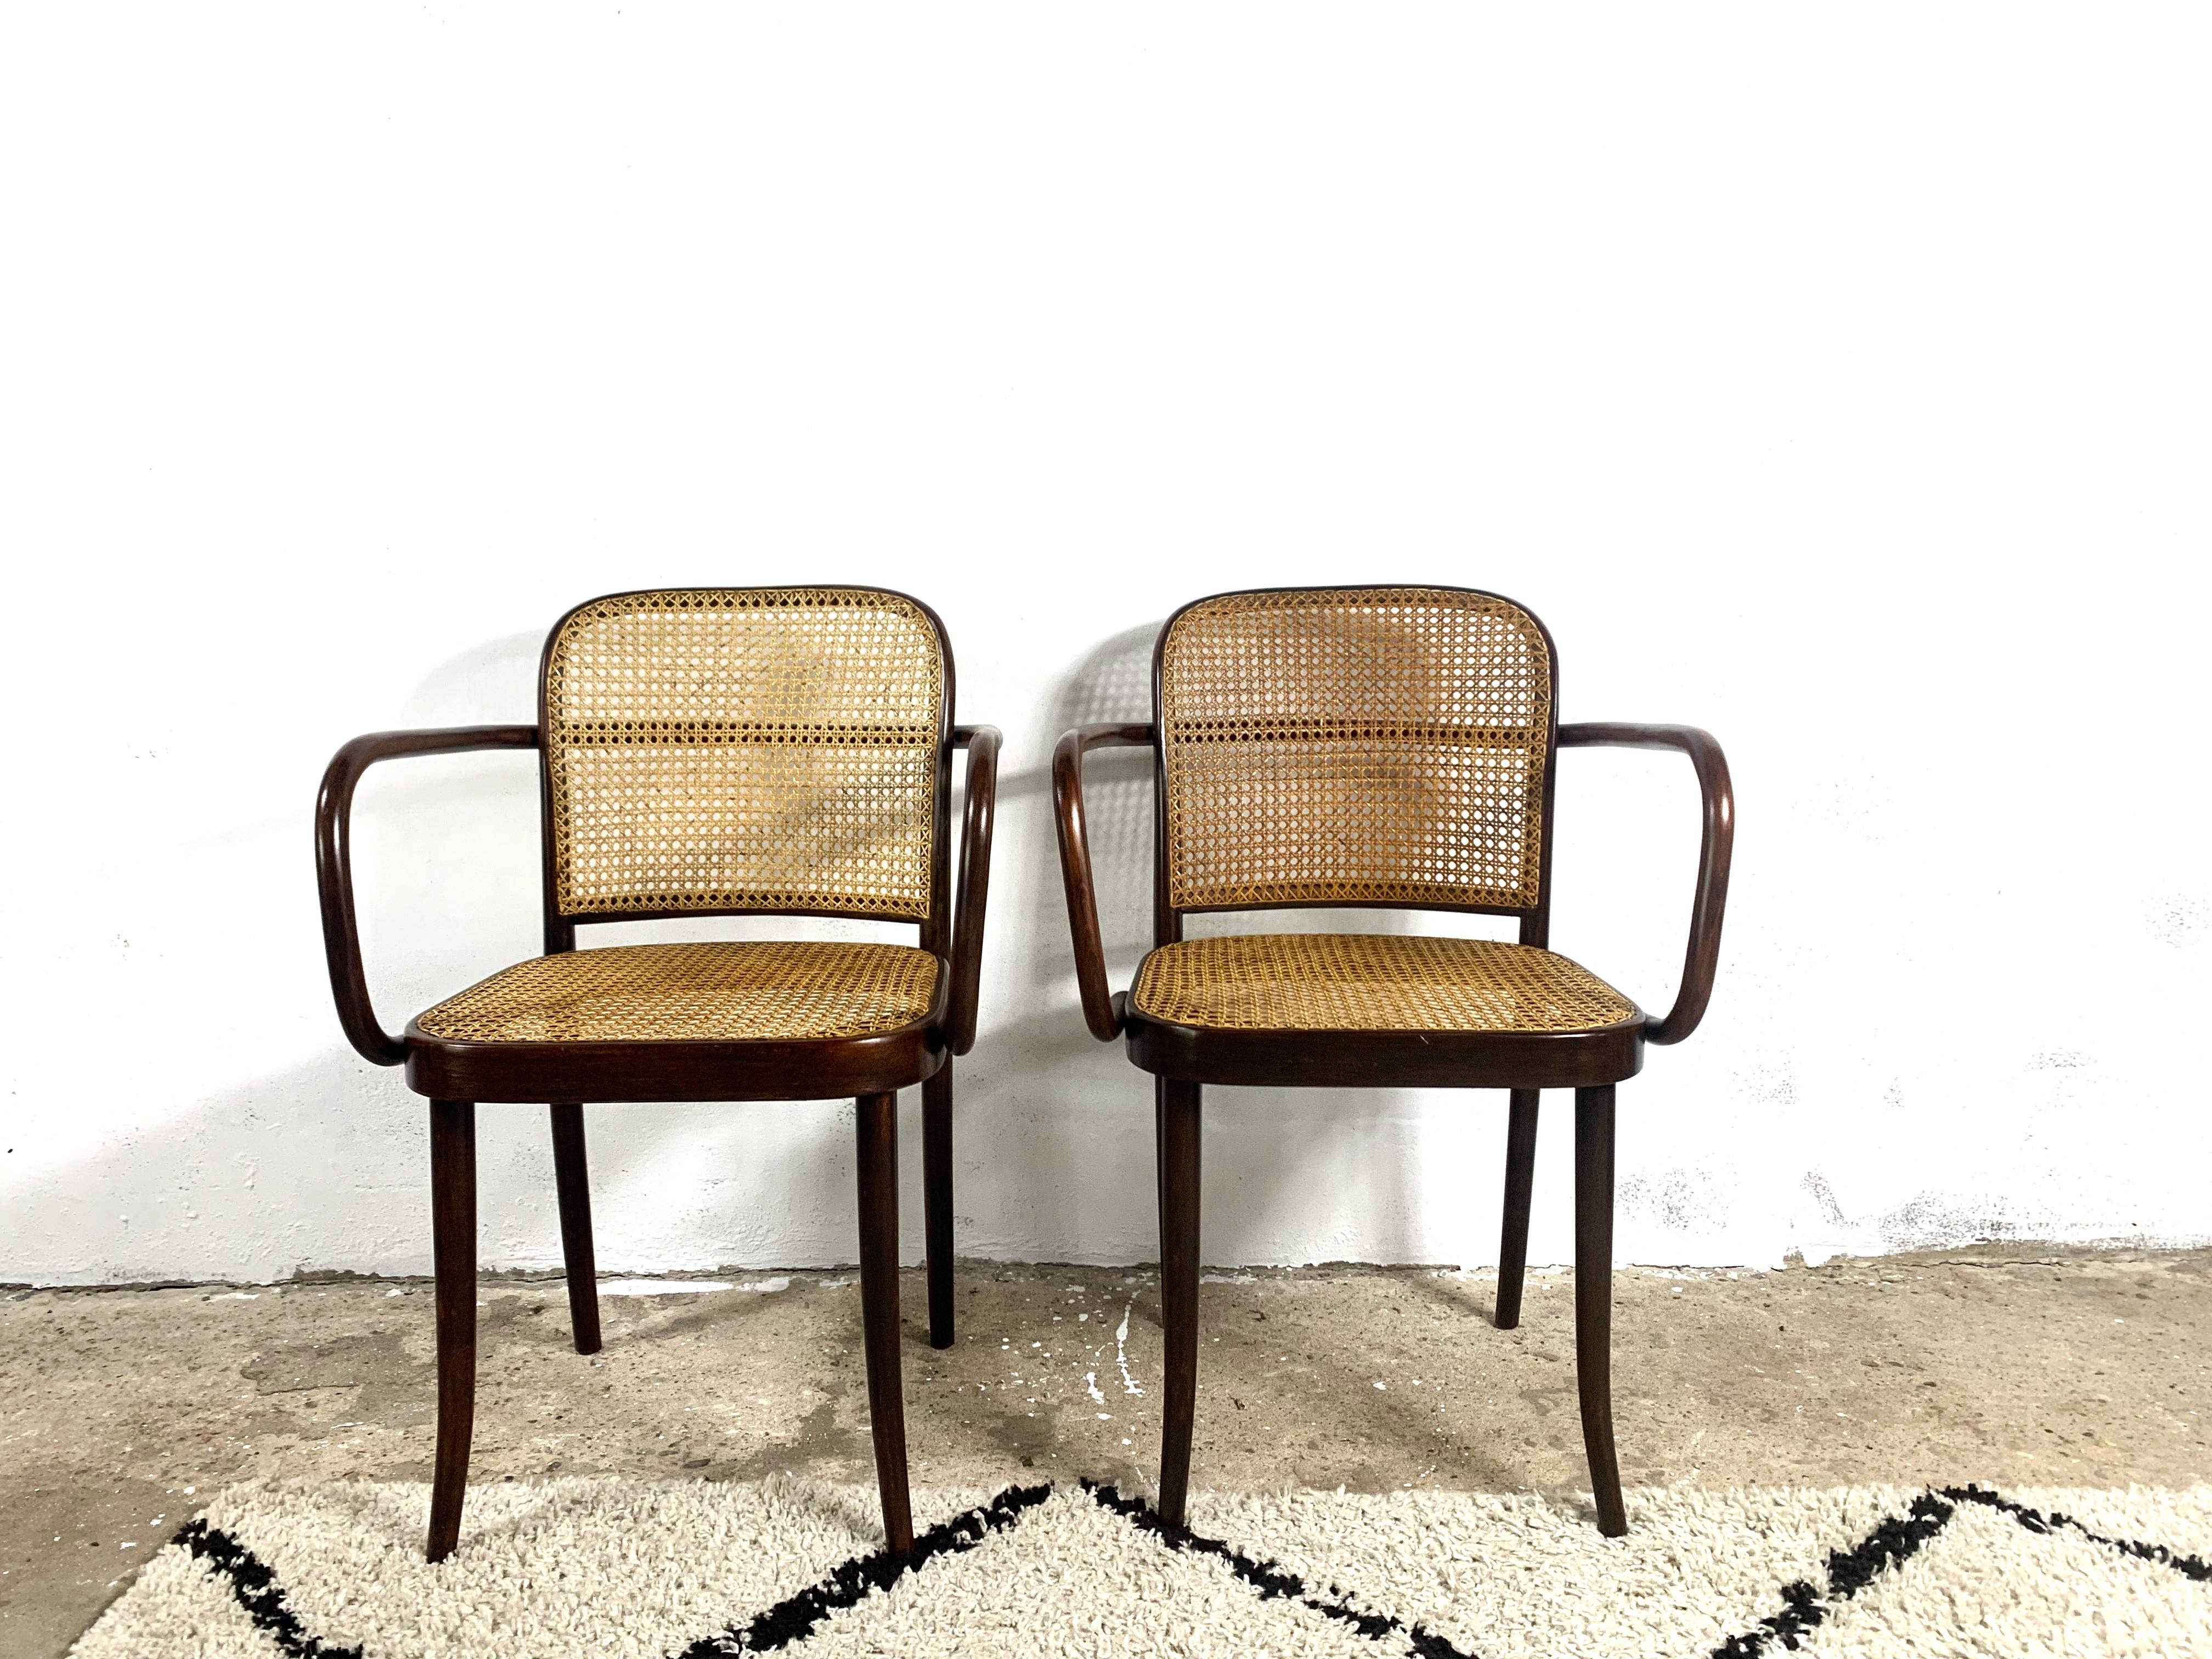 The Thonet A811 chair is a variant of the 811 chair with armrests. The design by Viennese architects Jozef Hoffman and Jozef Frank was created in the 1920s and is still produced today. The presented pieces come from the 1930s and were produced by